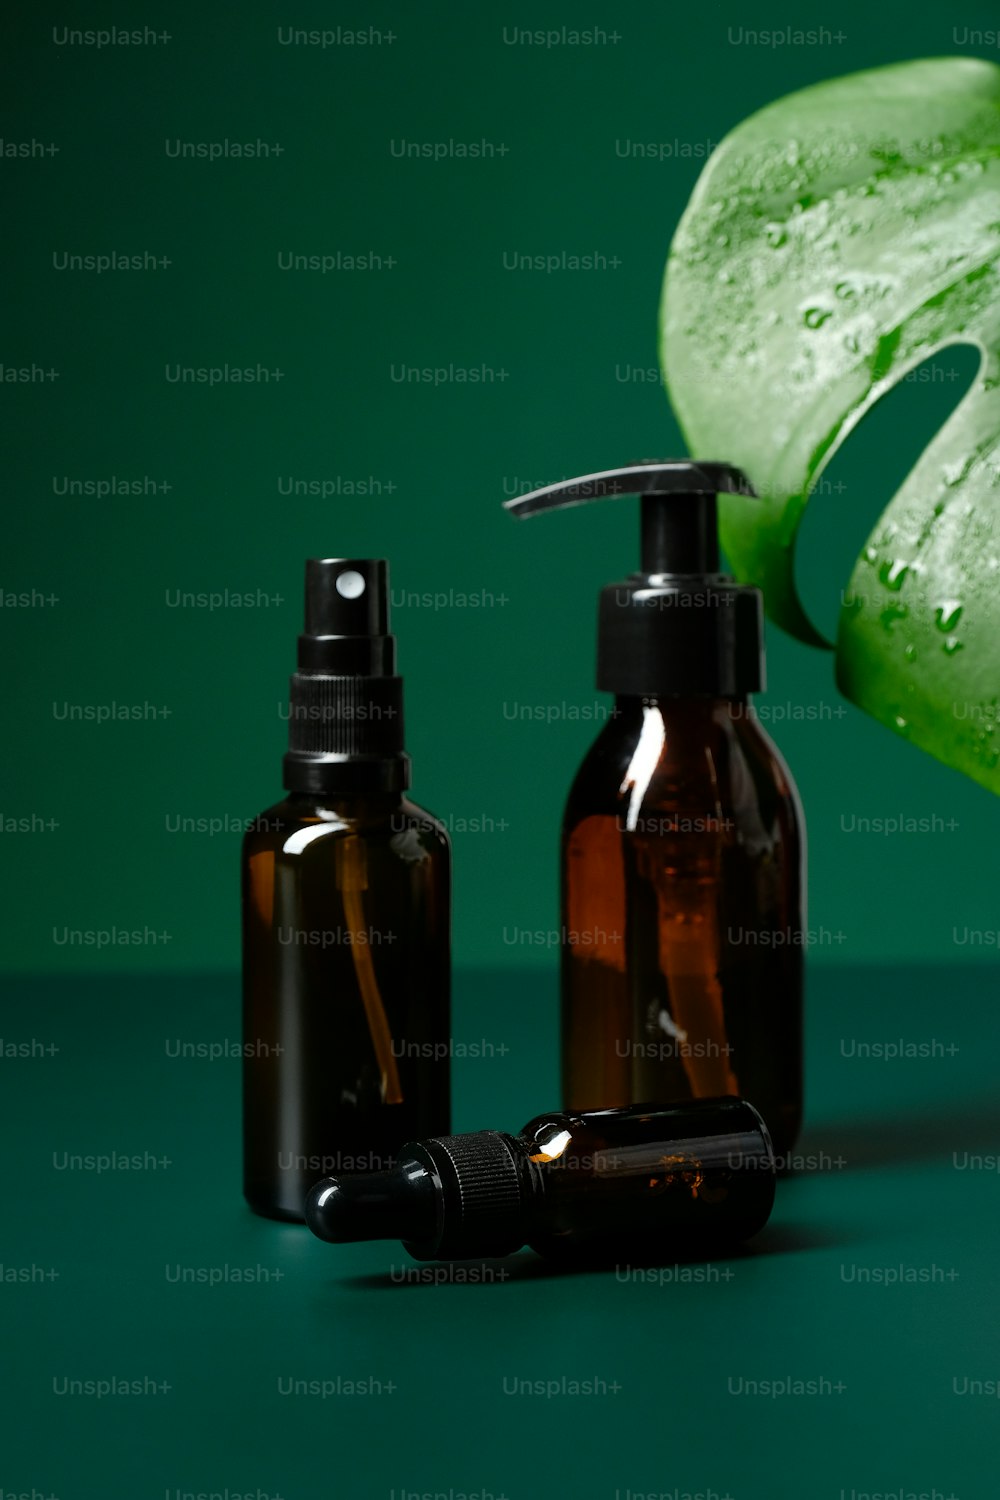 Amber glass cosmetic bottles set and monstera leaf on green background. Natural organic beauty products packaging without labels.